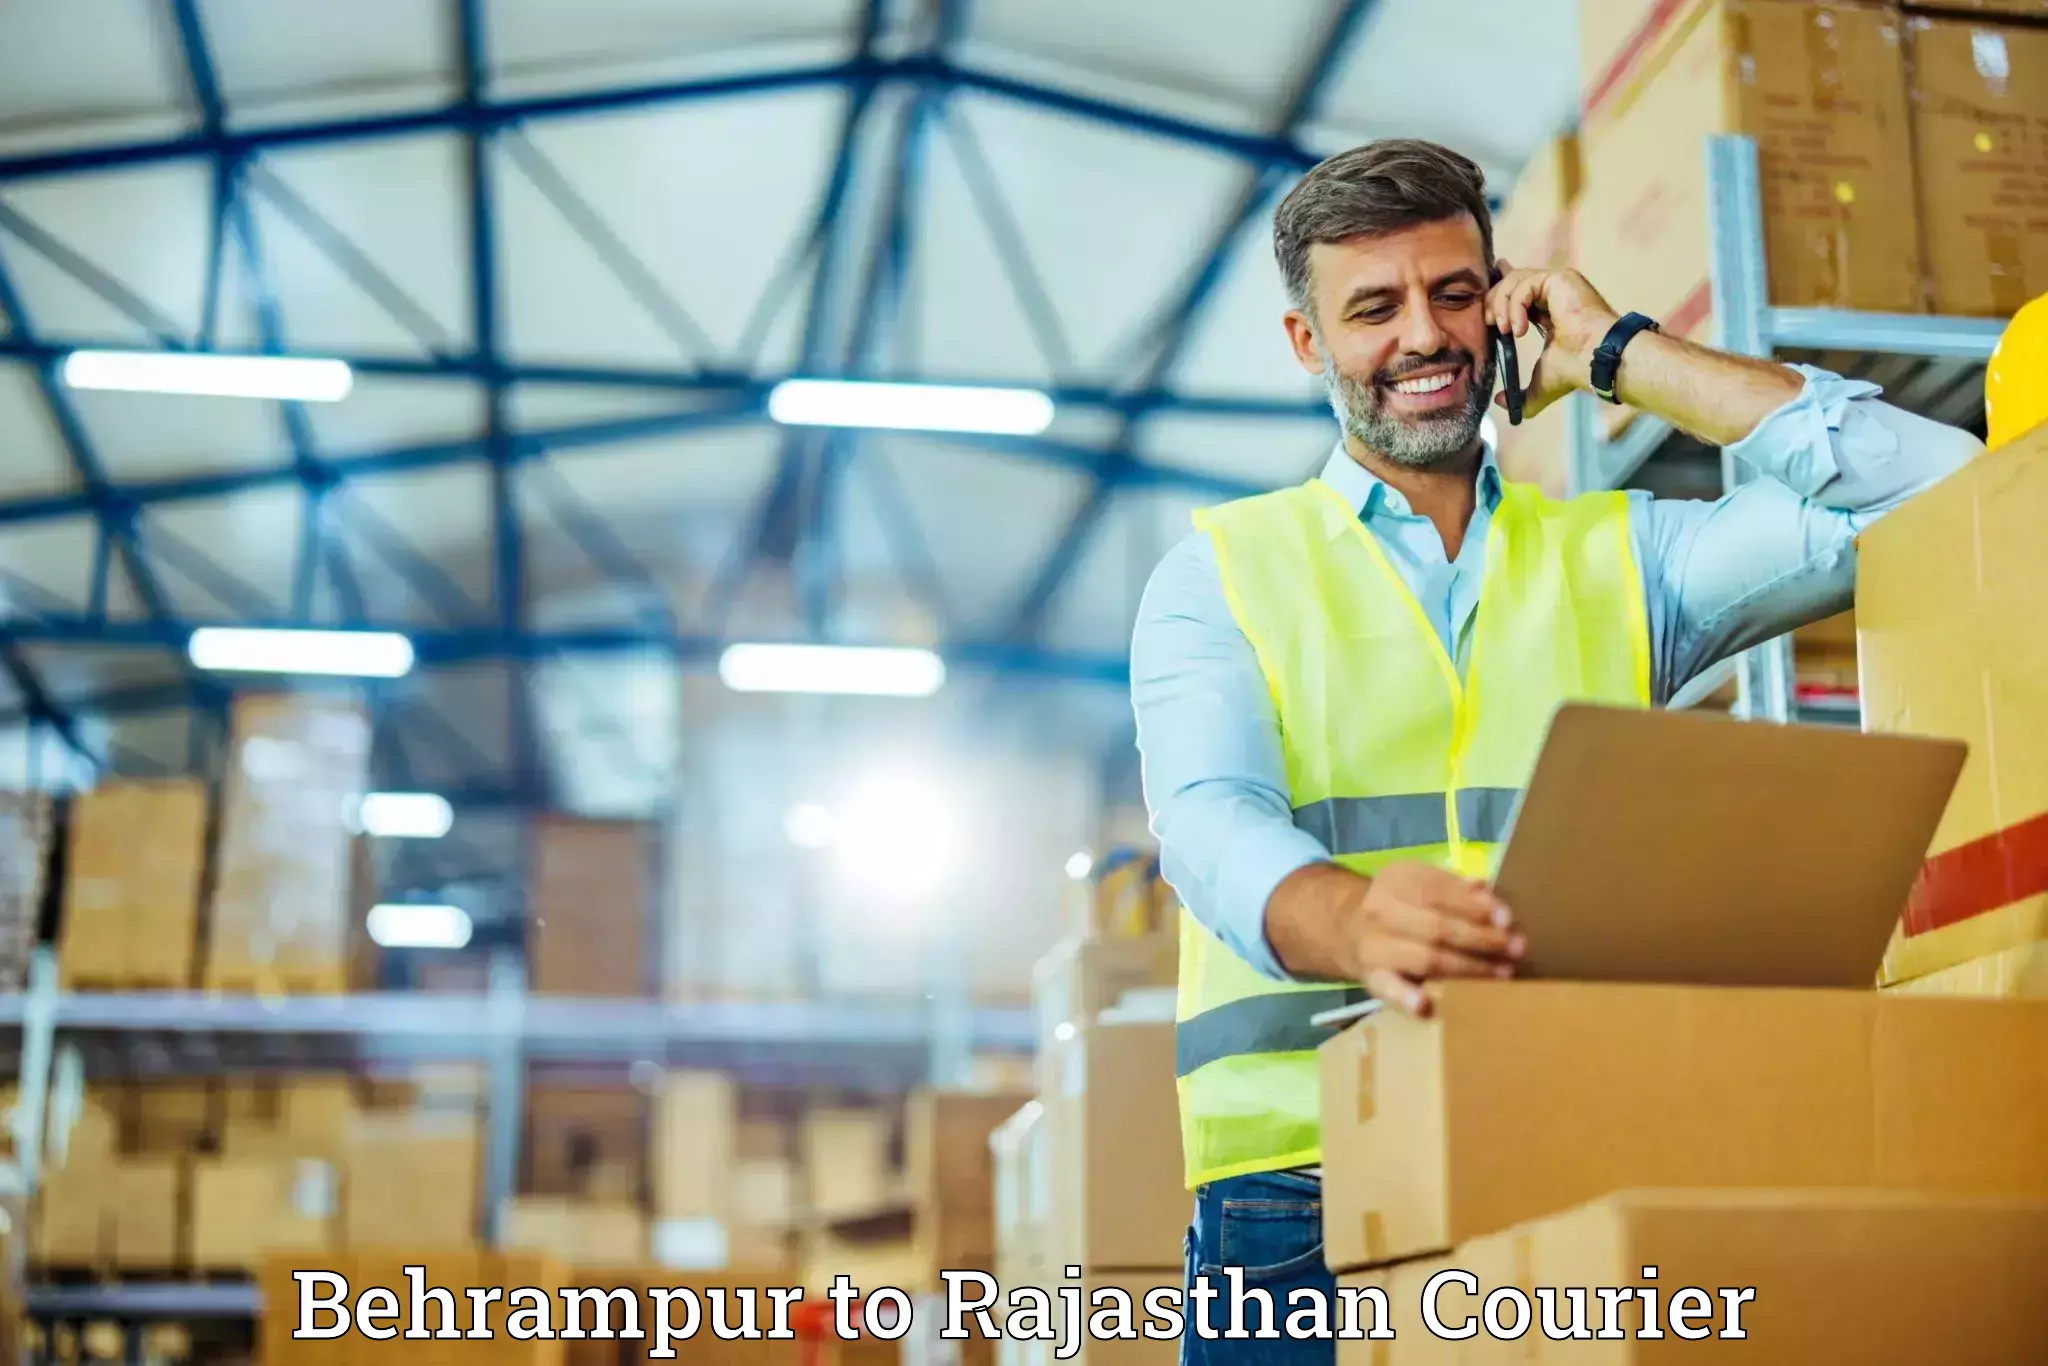 Professional moving company Behrampur to Mathania